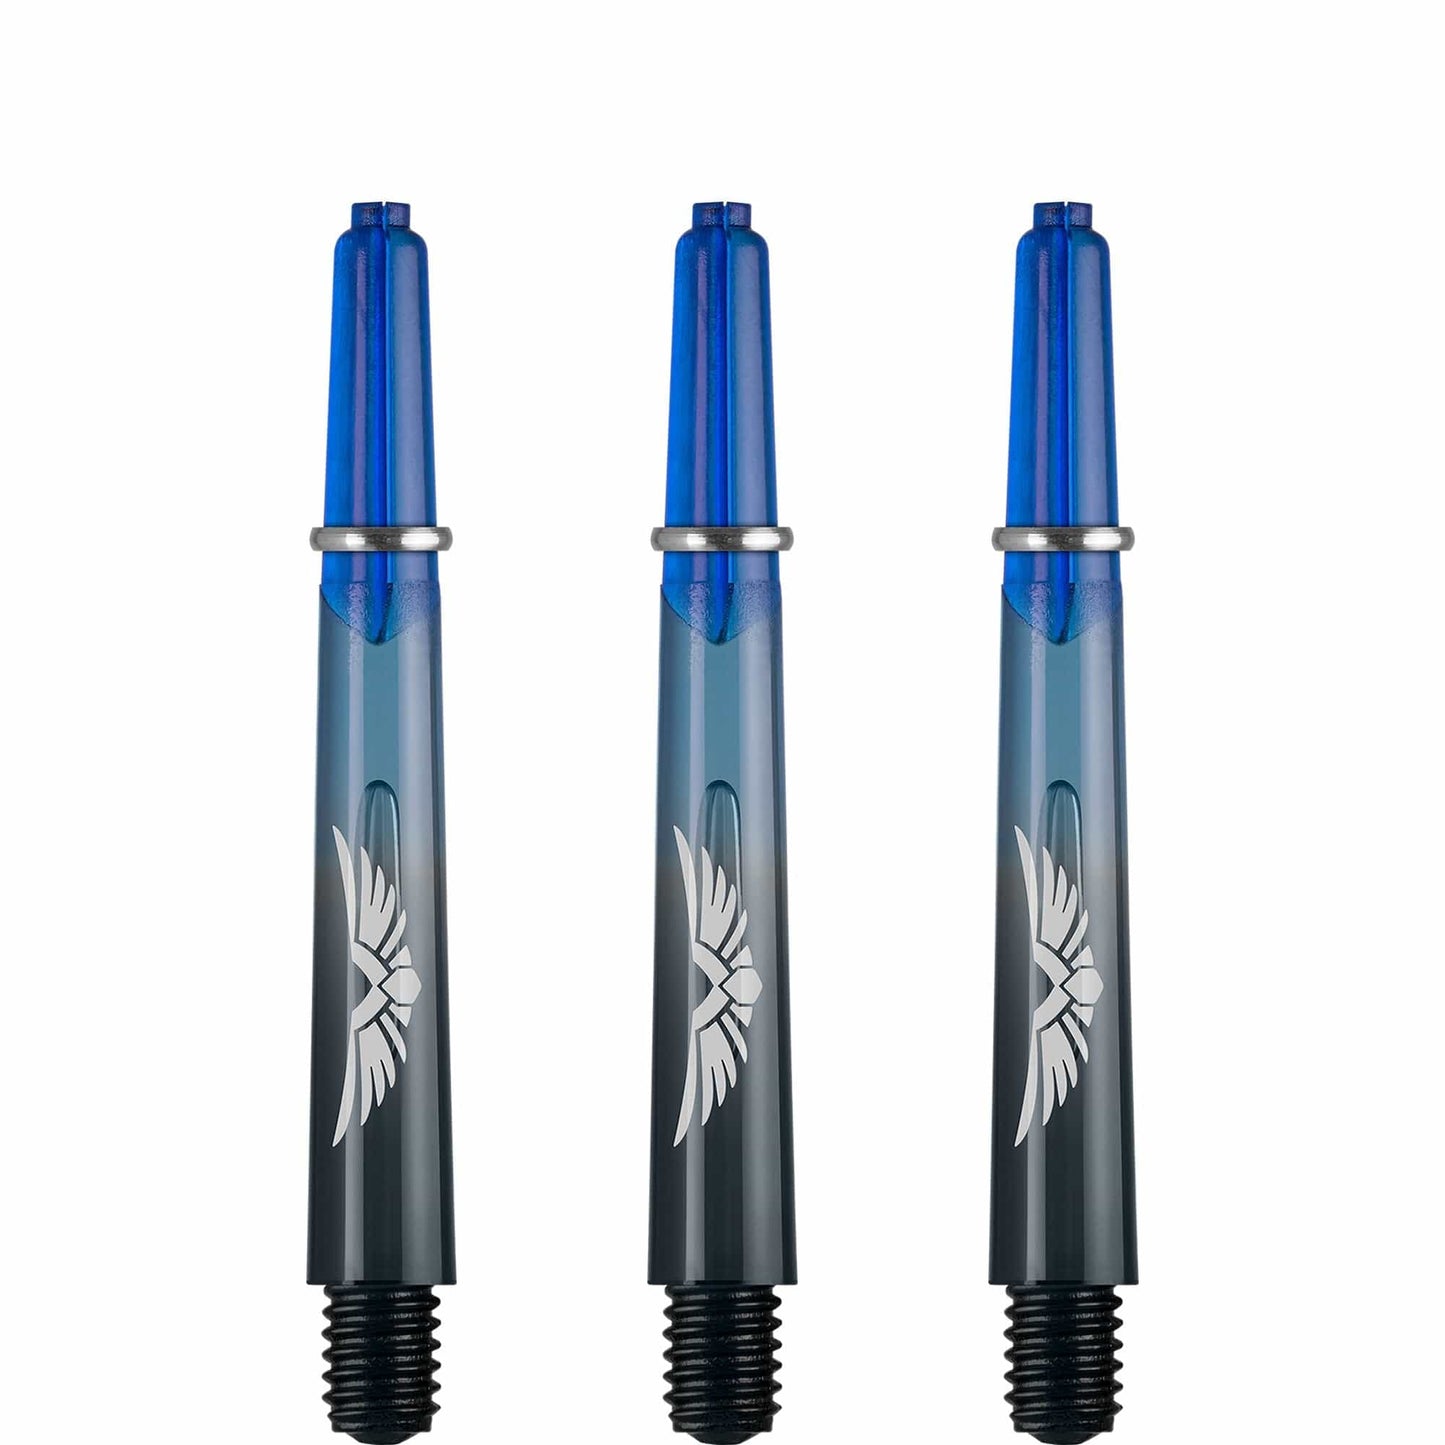 Shot Eagle Claw Dart Shafts - with Machined Rings - Strong Polycarbonate Stems - Black Blue Tweenie